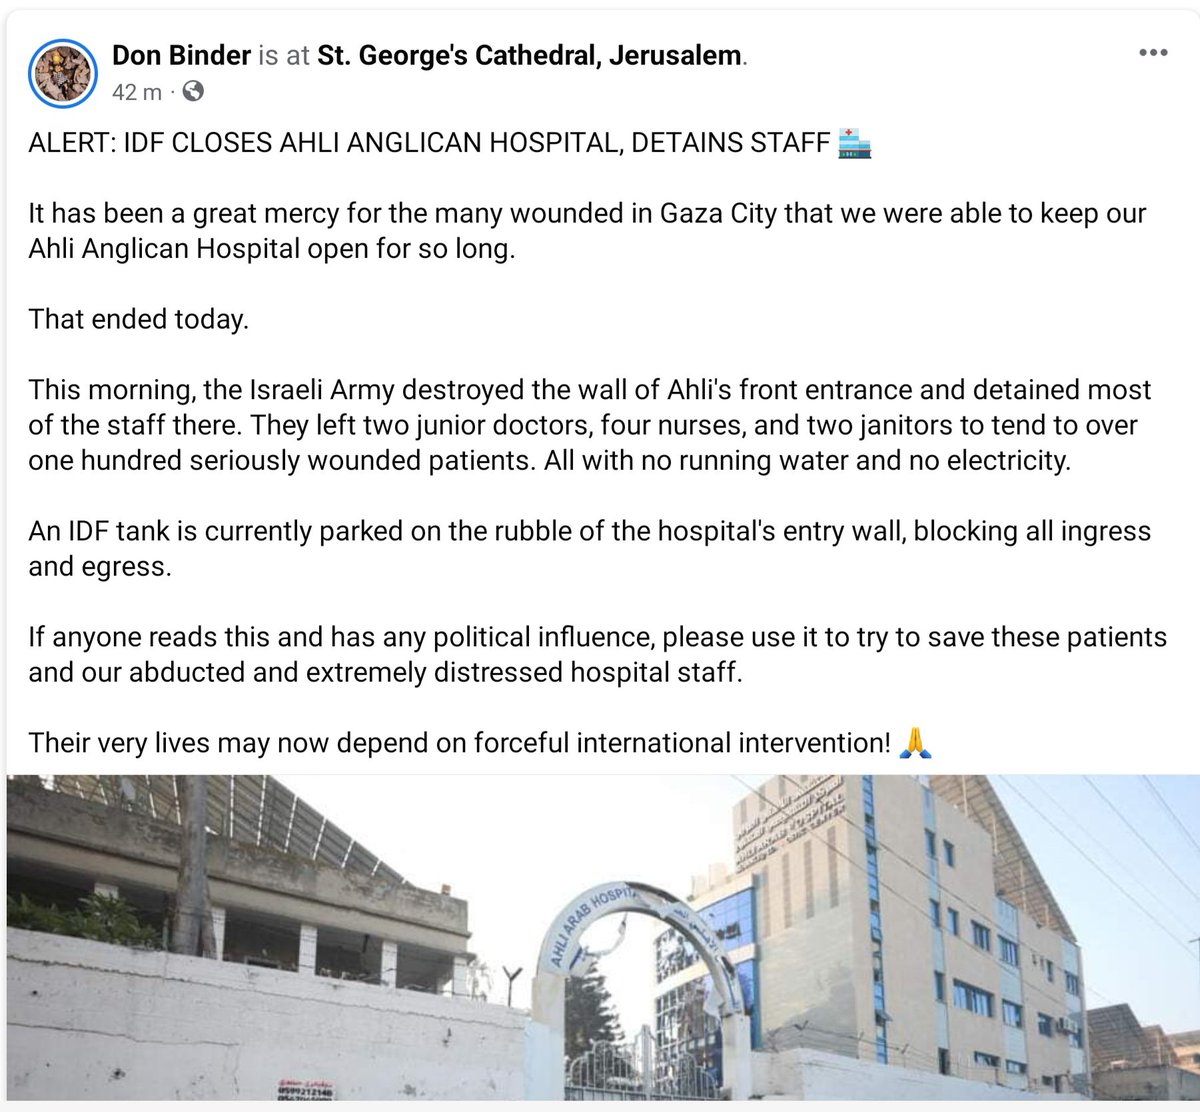 'ALERT: IDF CLOSES AHLI ANGLICAN HOSPITAL, DETAINS STAFF. This morning, the Israeli Army destroyed the wall of Ahli's front entrance and detained most of the staff there.' (From the Facebook page of Rev Donald Bider the chaplain of the Anglican Archbishop in Jerusalem.)